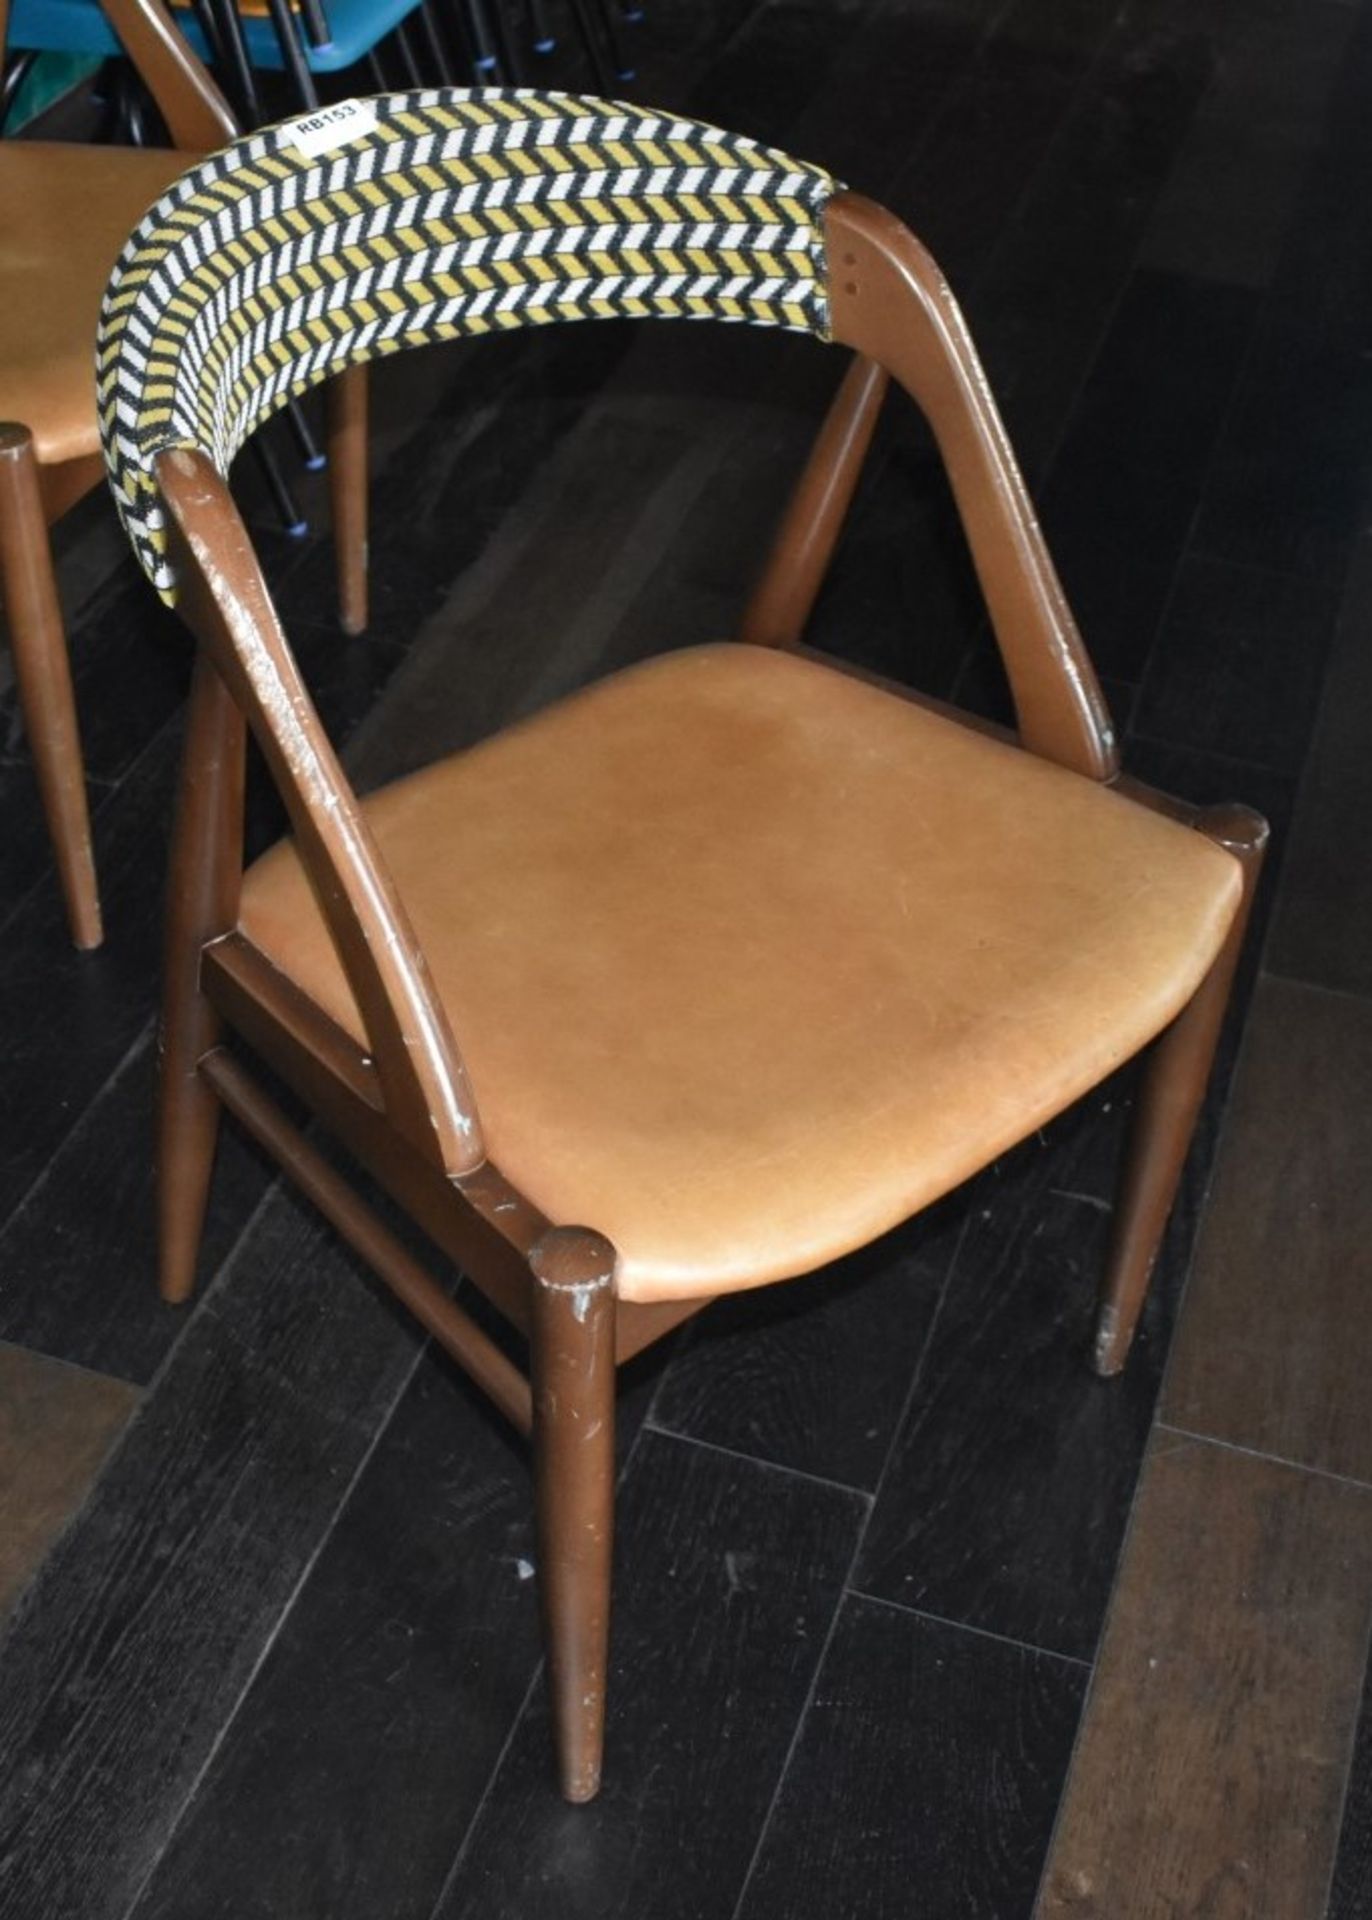 2 x Dining Chairs With Bent Wood Frames, Tan Seats and Fabric Backrests - Ref: RB153 - CL558 - - Image 2 of 3